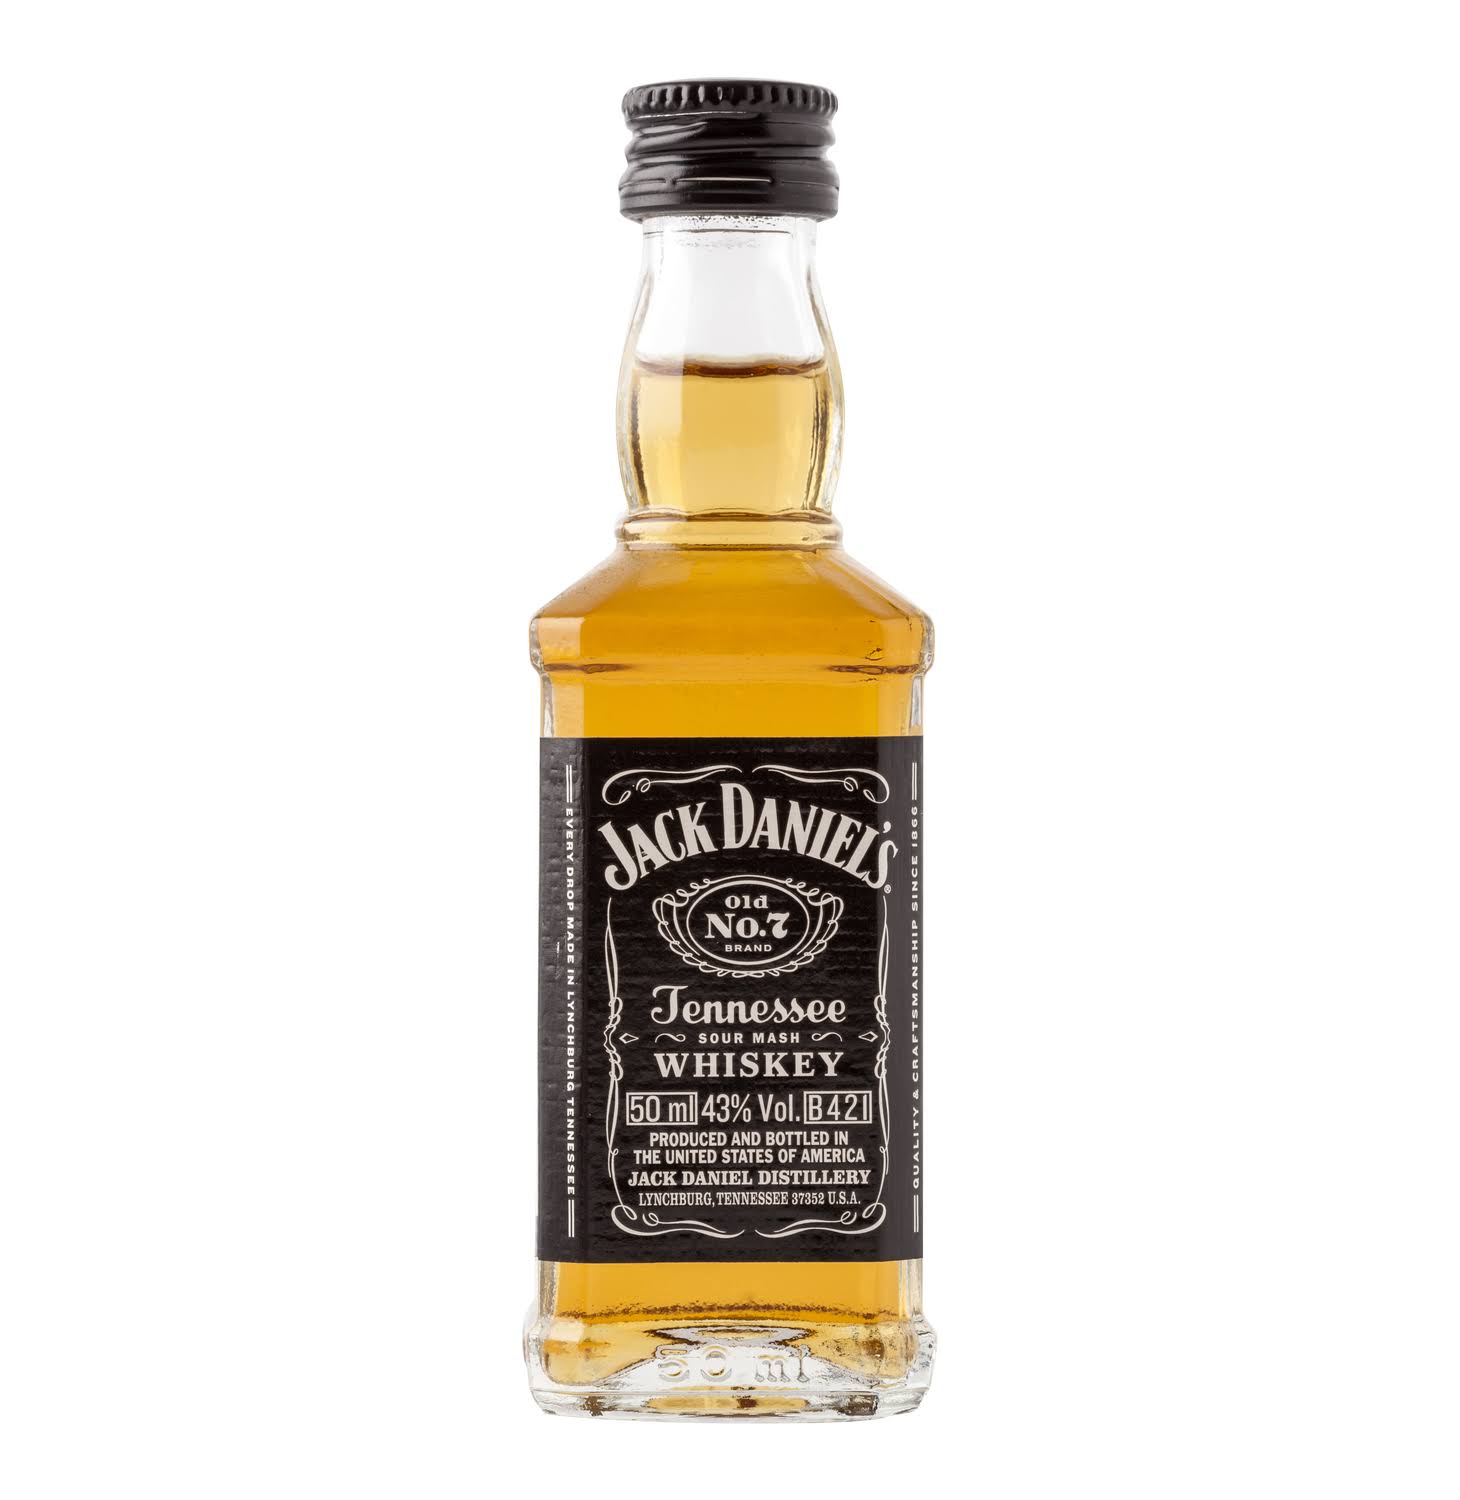 Jack Daniel's Old No. 7 Tennessee Whiskey Miniature 50ml